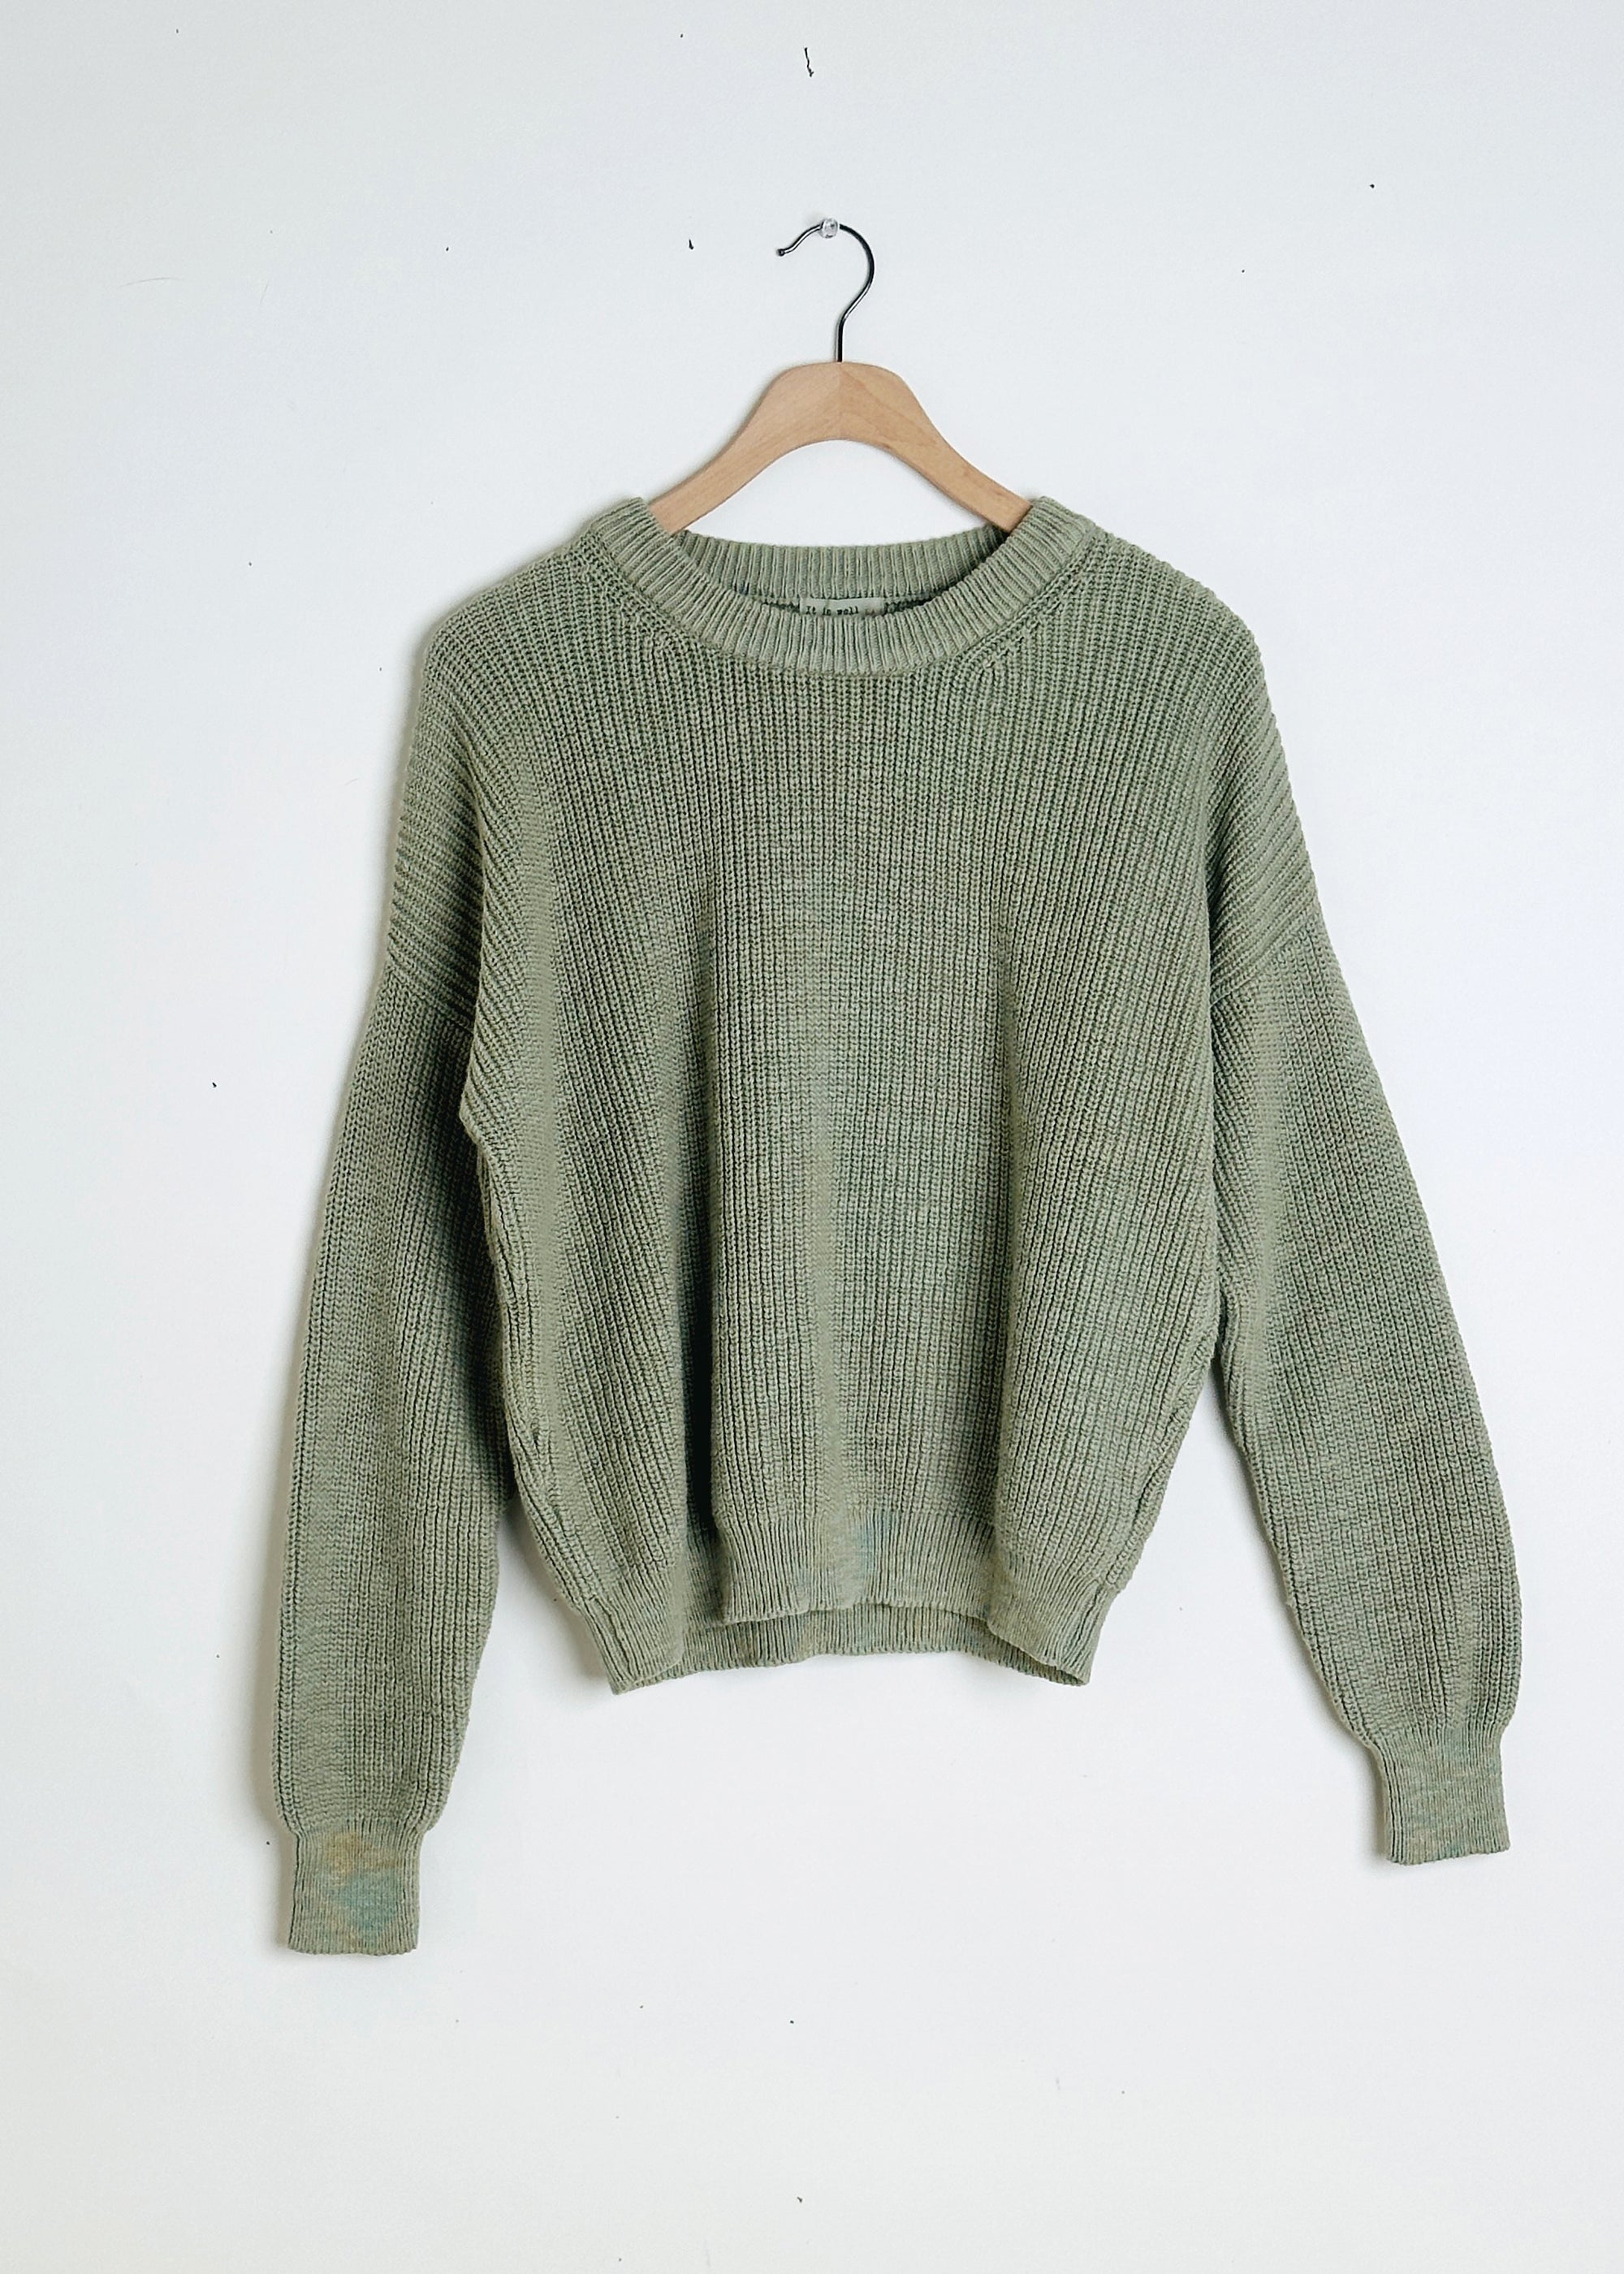 Cotton Pull On Sweater